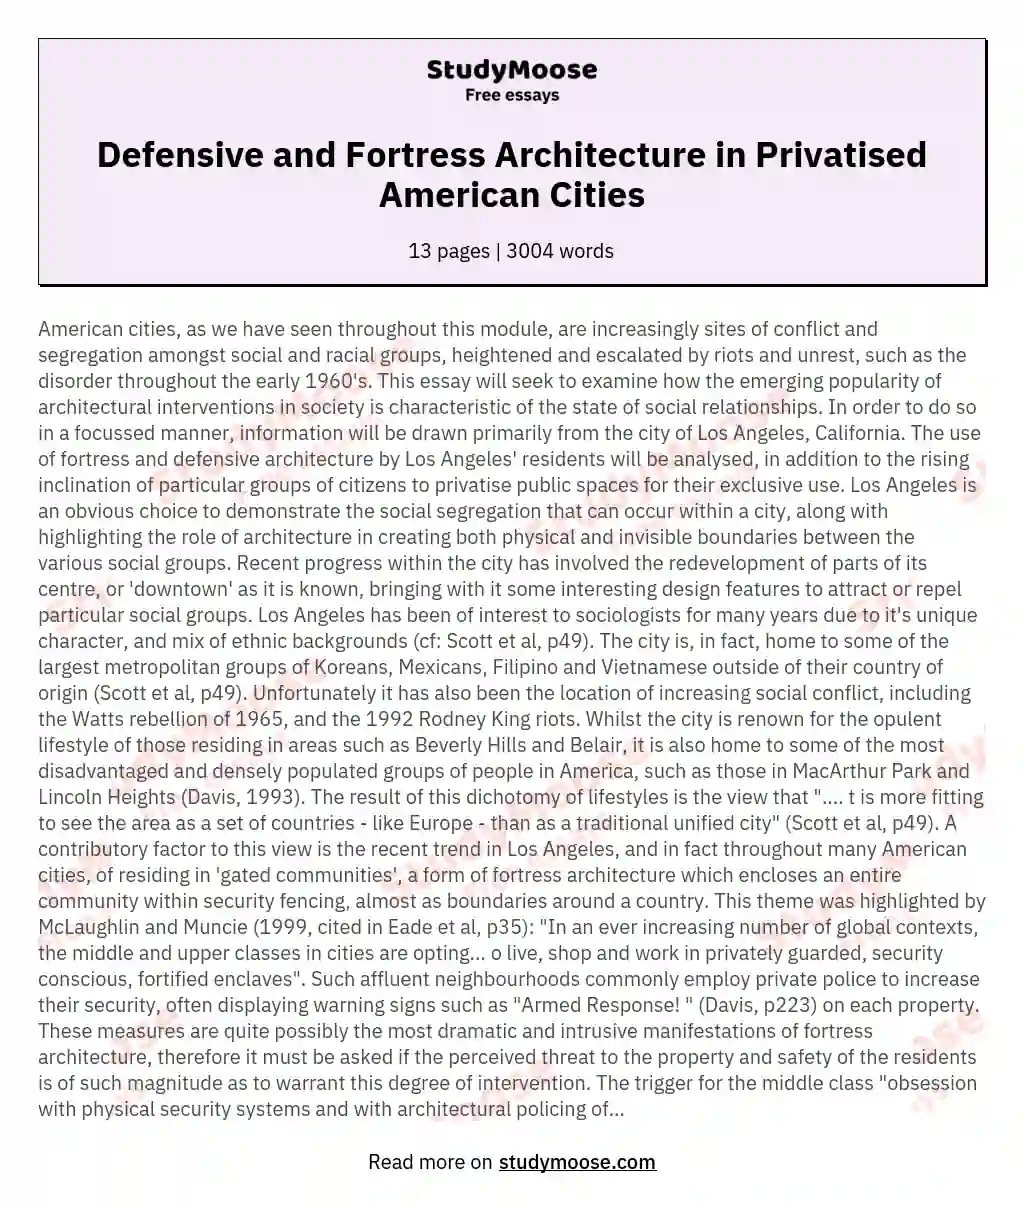 Defensive and Fortress Architecture in Privatised American Cities